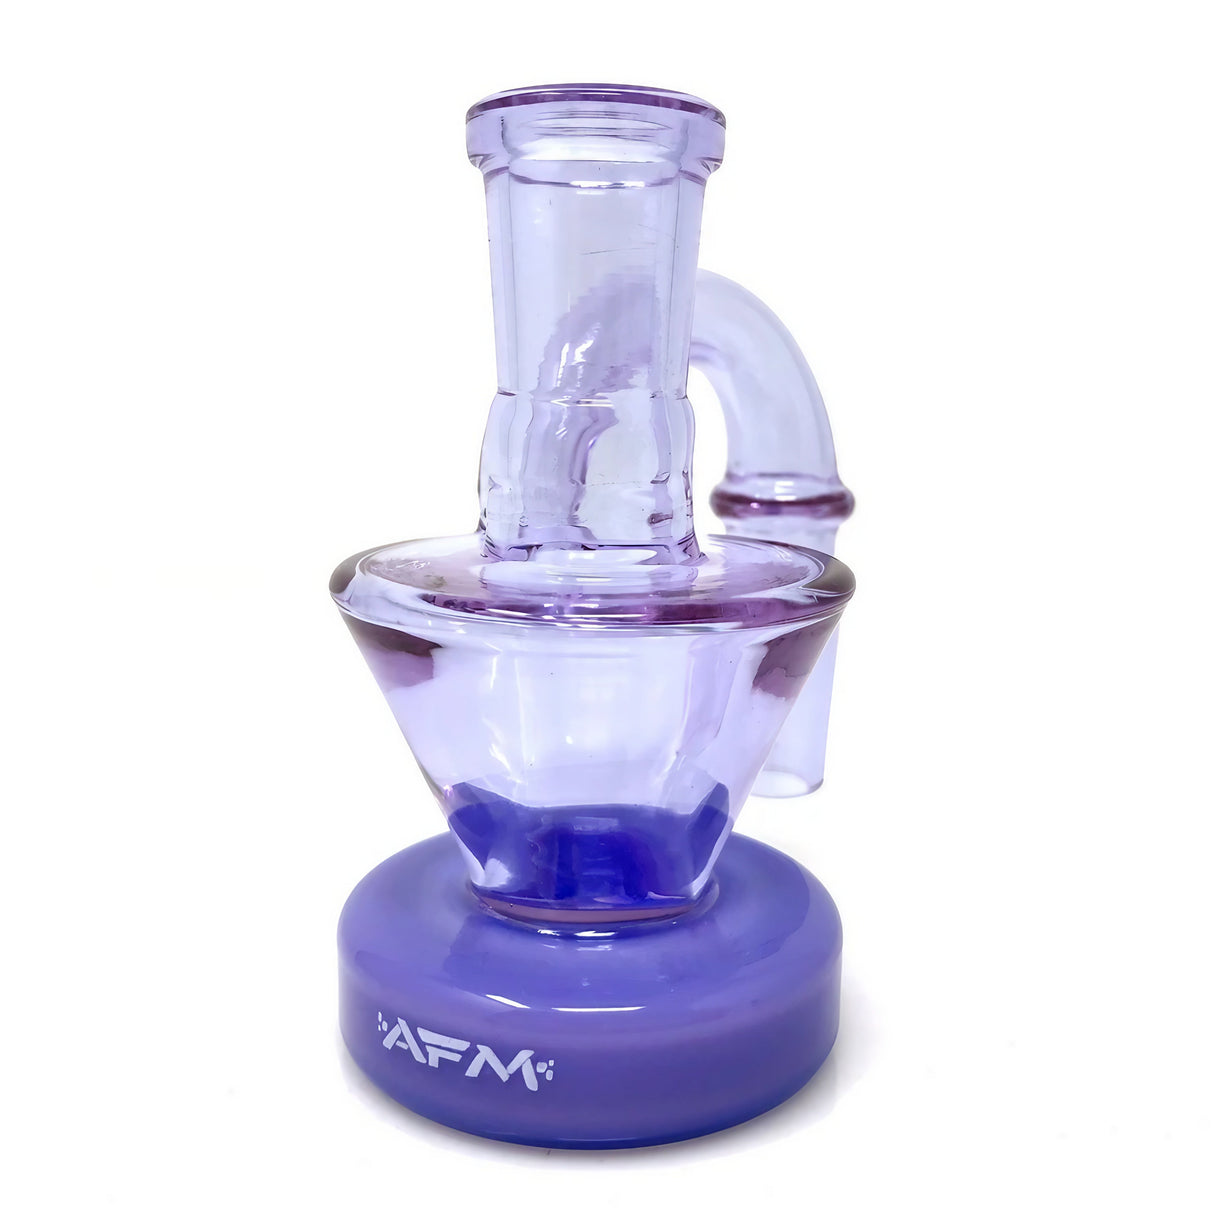 AFM Borosilicate Glass Ash-Catcher in Purple, 90 Degree Joint, 3" for Bongs - Front View